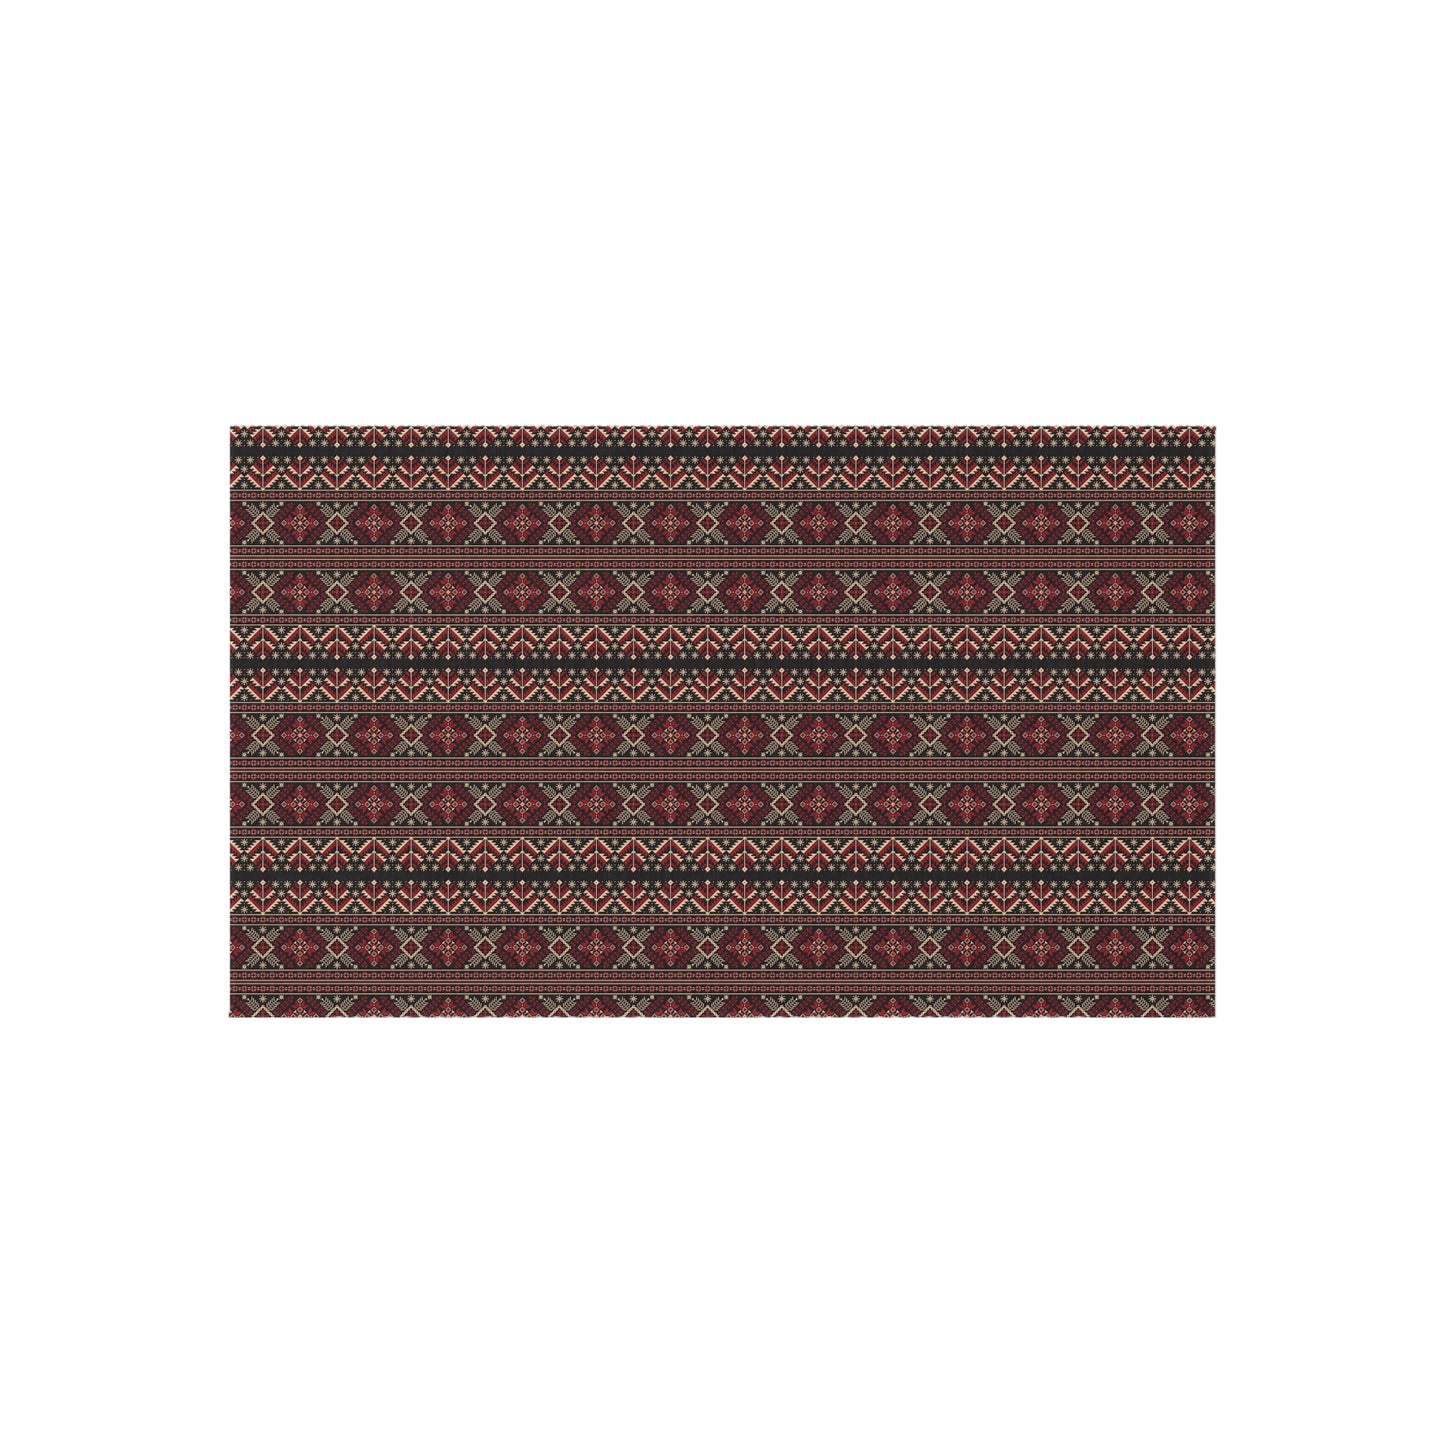 Niccie's Arabic Pattern Outdoor Rug - Durable and Stylish Design